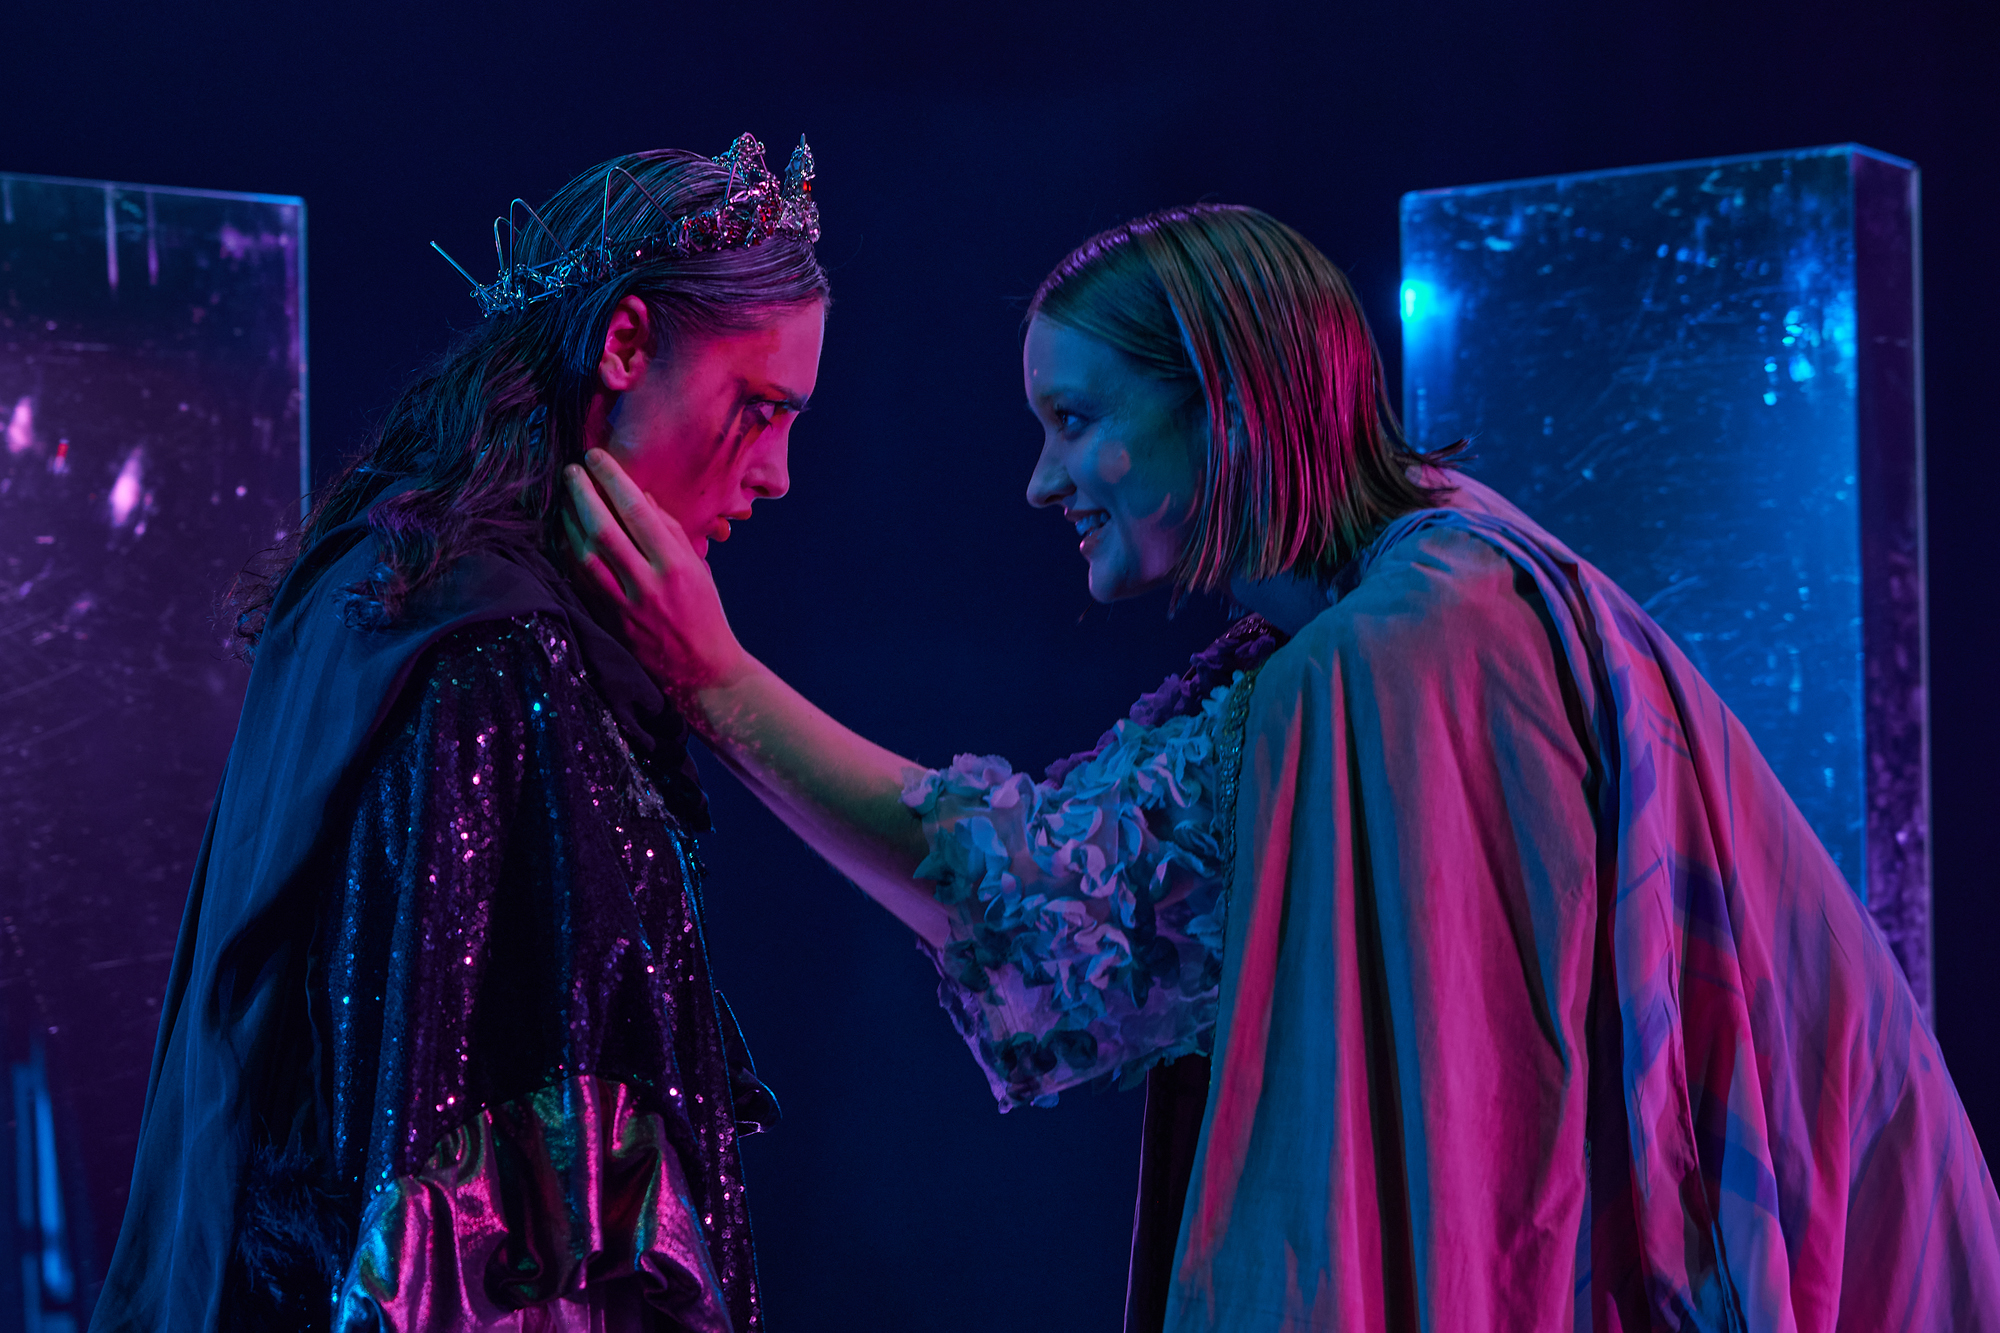 The same image as the thumbnail: a photo of two actors facing each other. Tintomara, the actor on the right, is smiling and holding the face of Clara between her hands. Clara frowns, her make up smeared and a crown on her head.